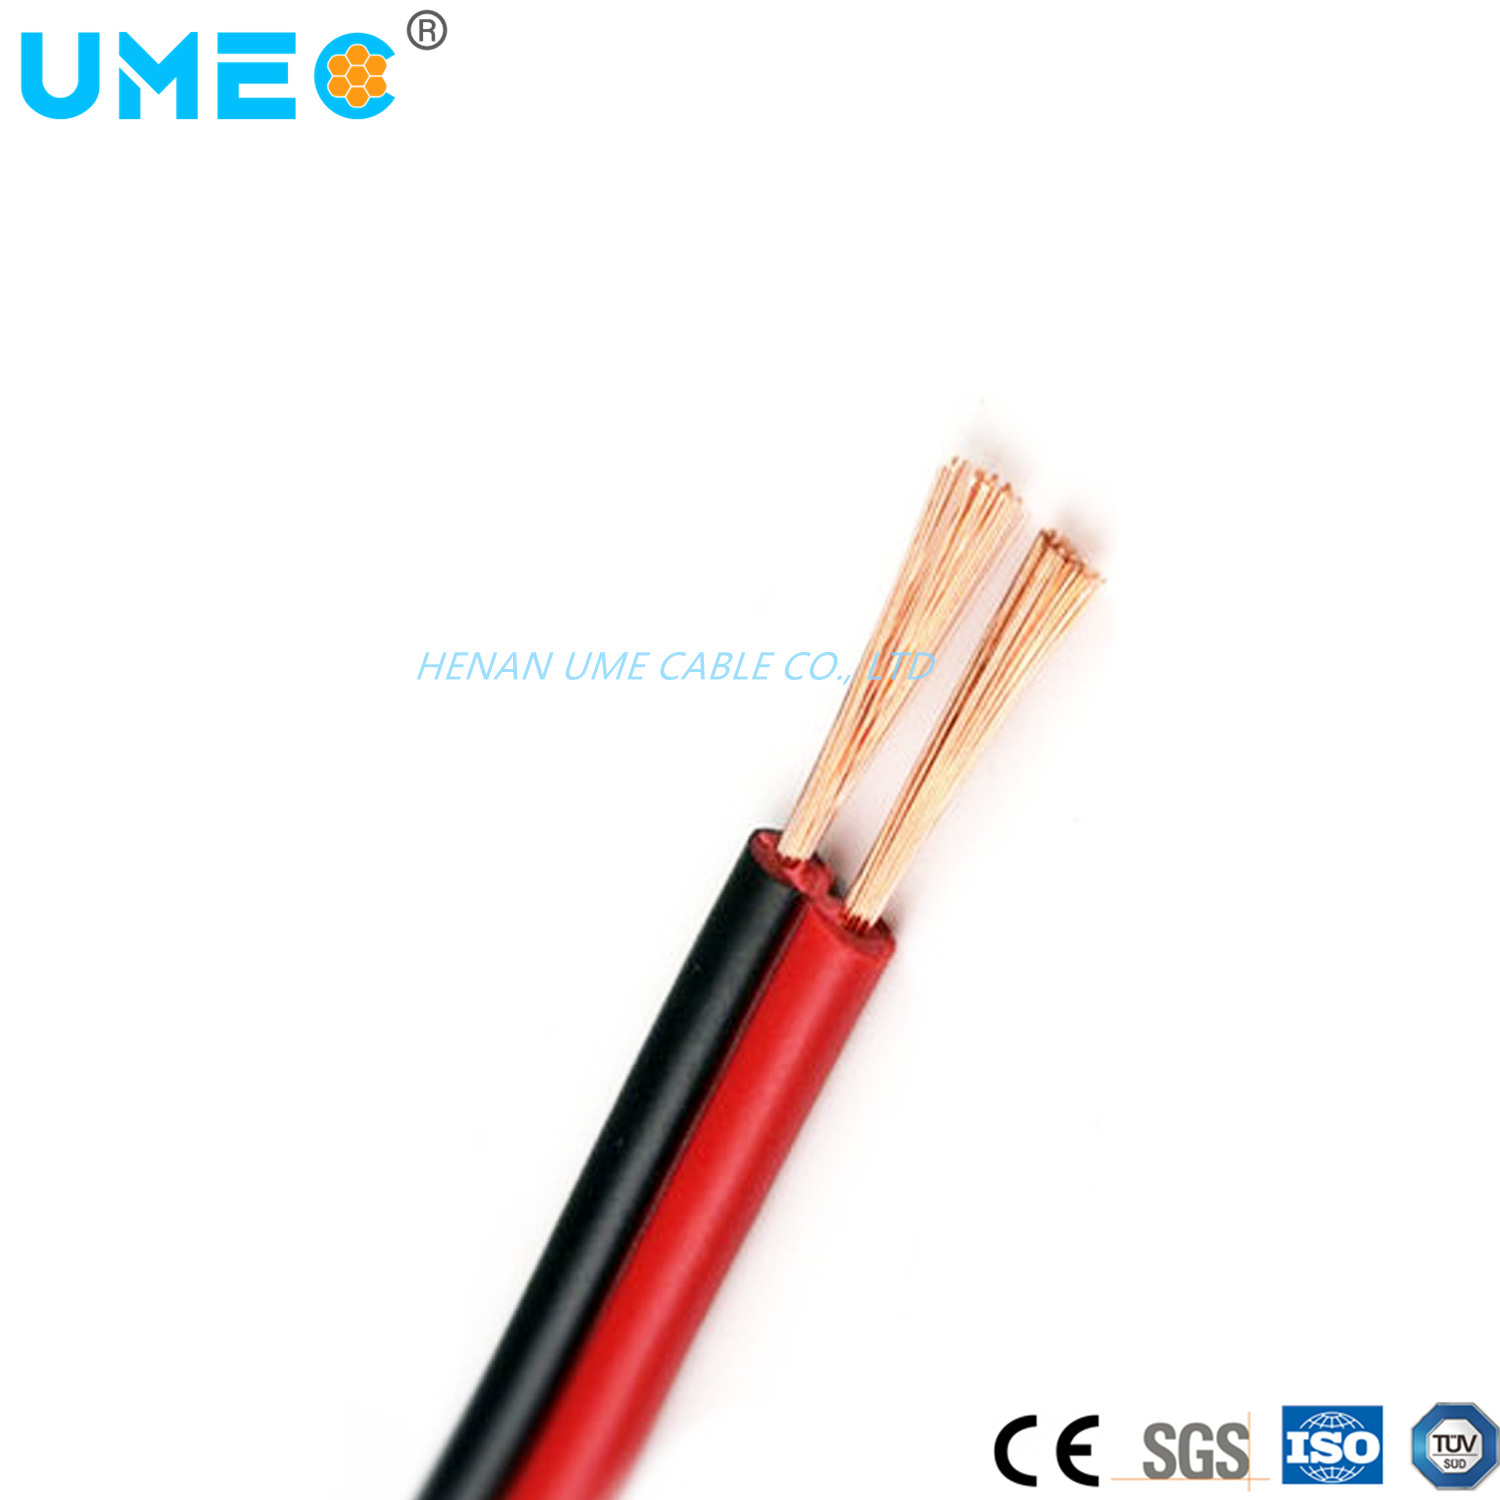 300V 0.75/1.25/2/3.5mm2 Stranded Flexible Cable Multicore Spt Cable